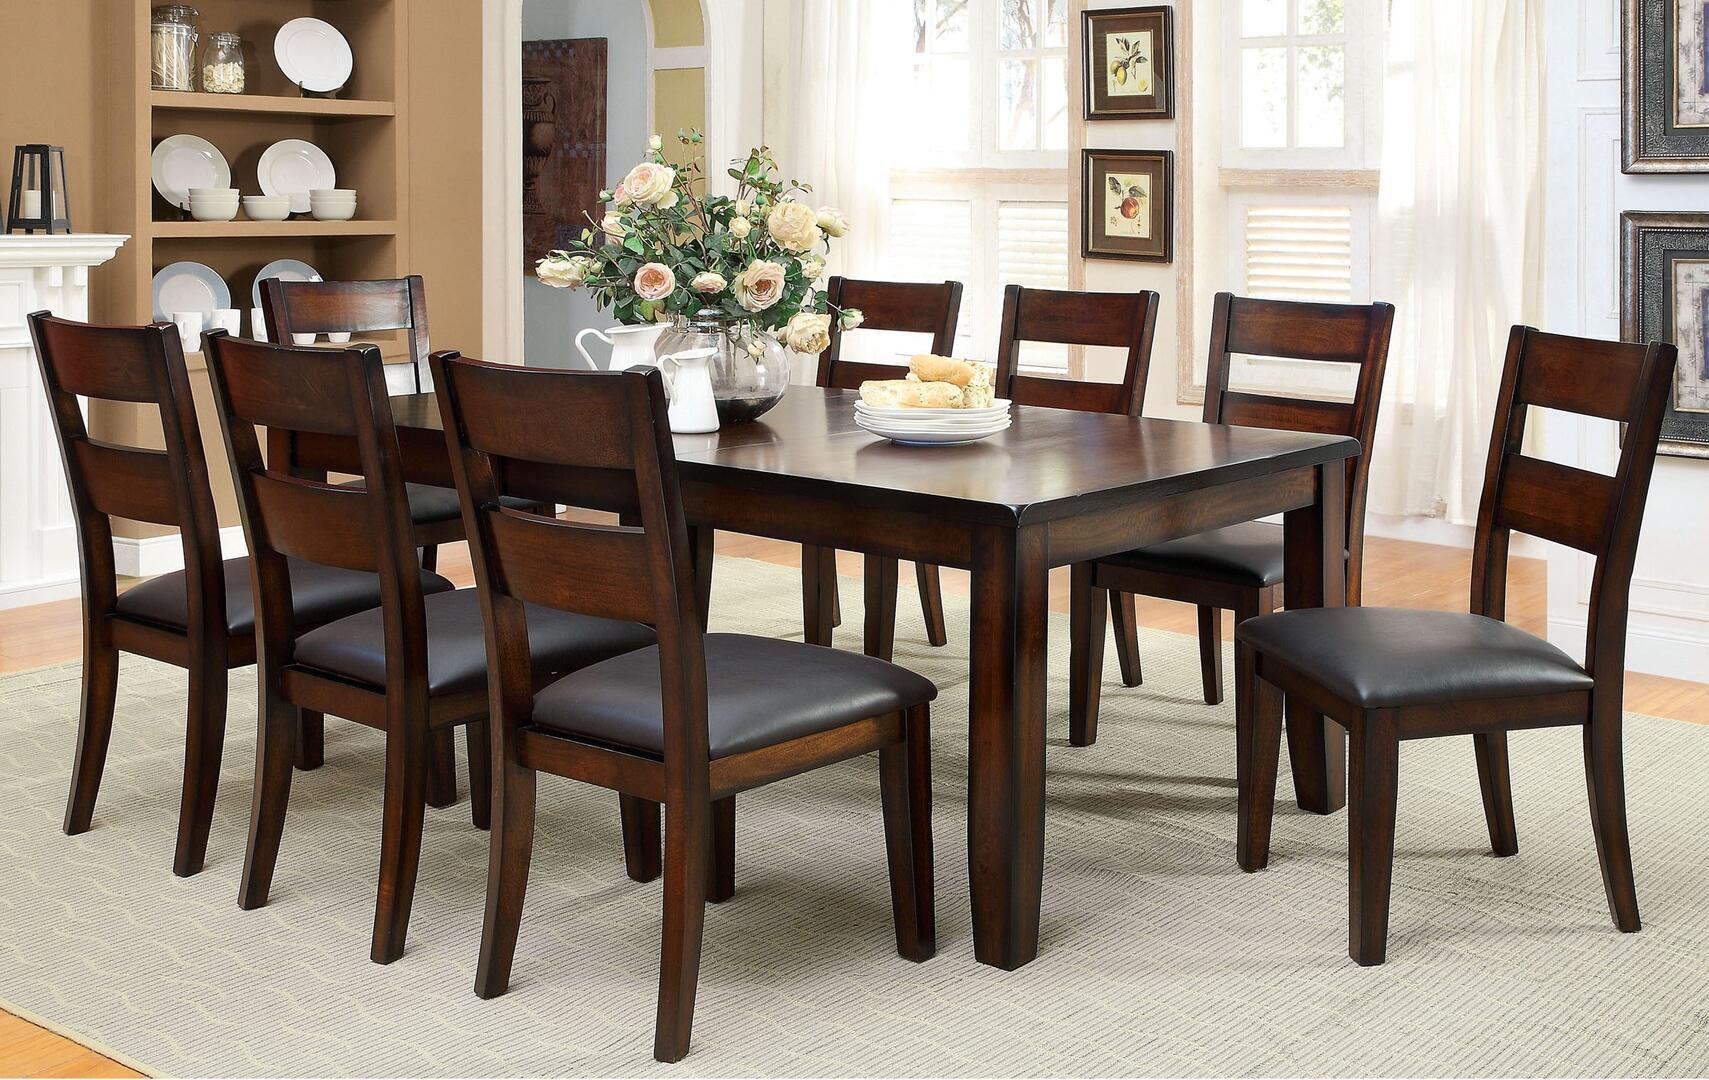 Transitional Dining Room Set CM3187T-Set-9 Dickinson CM3187T-9PC in Dark Cherry Leatherette